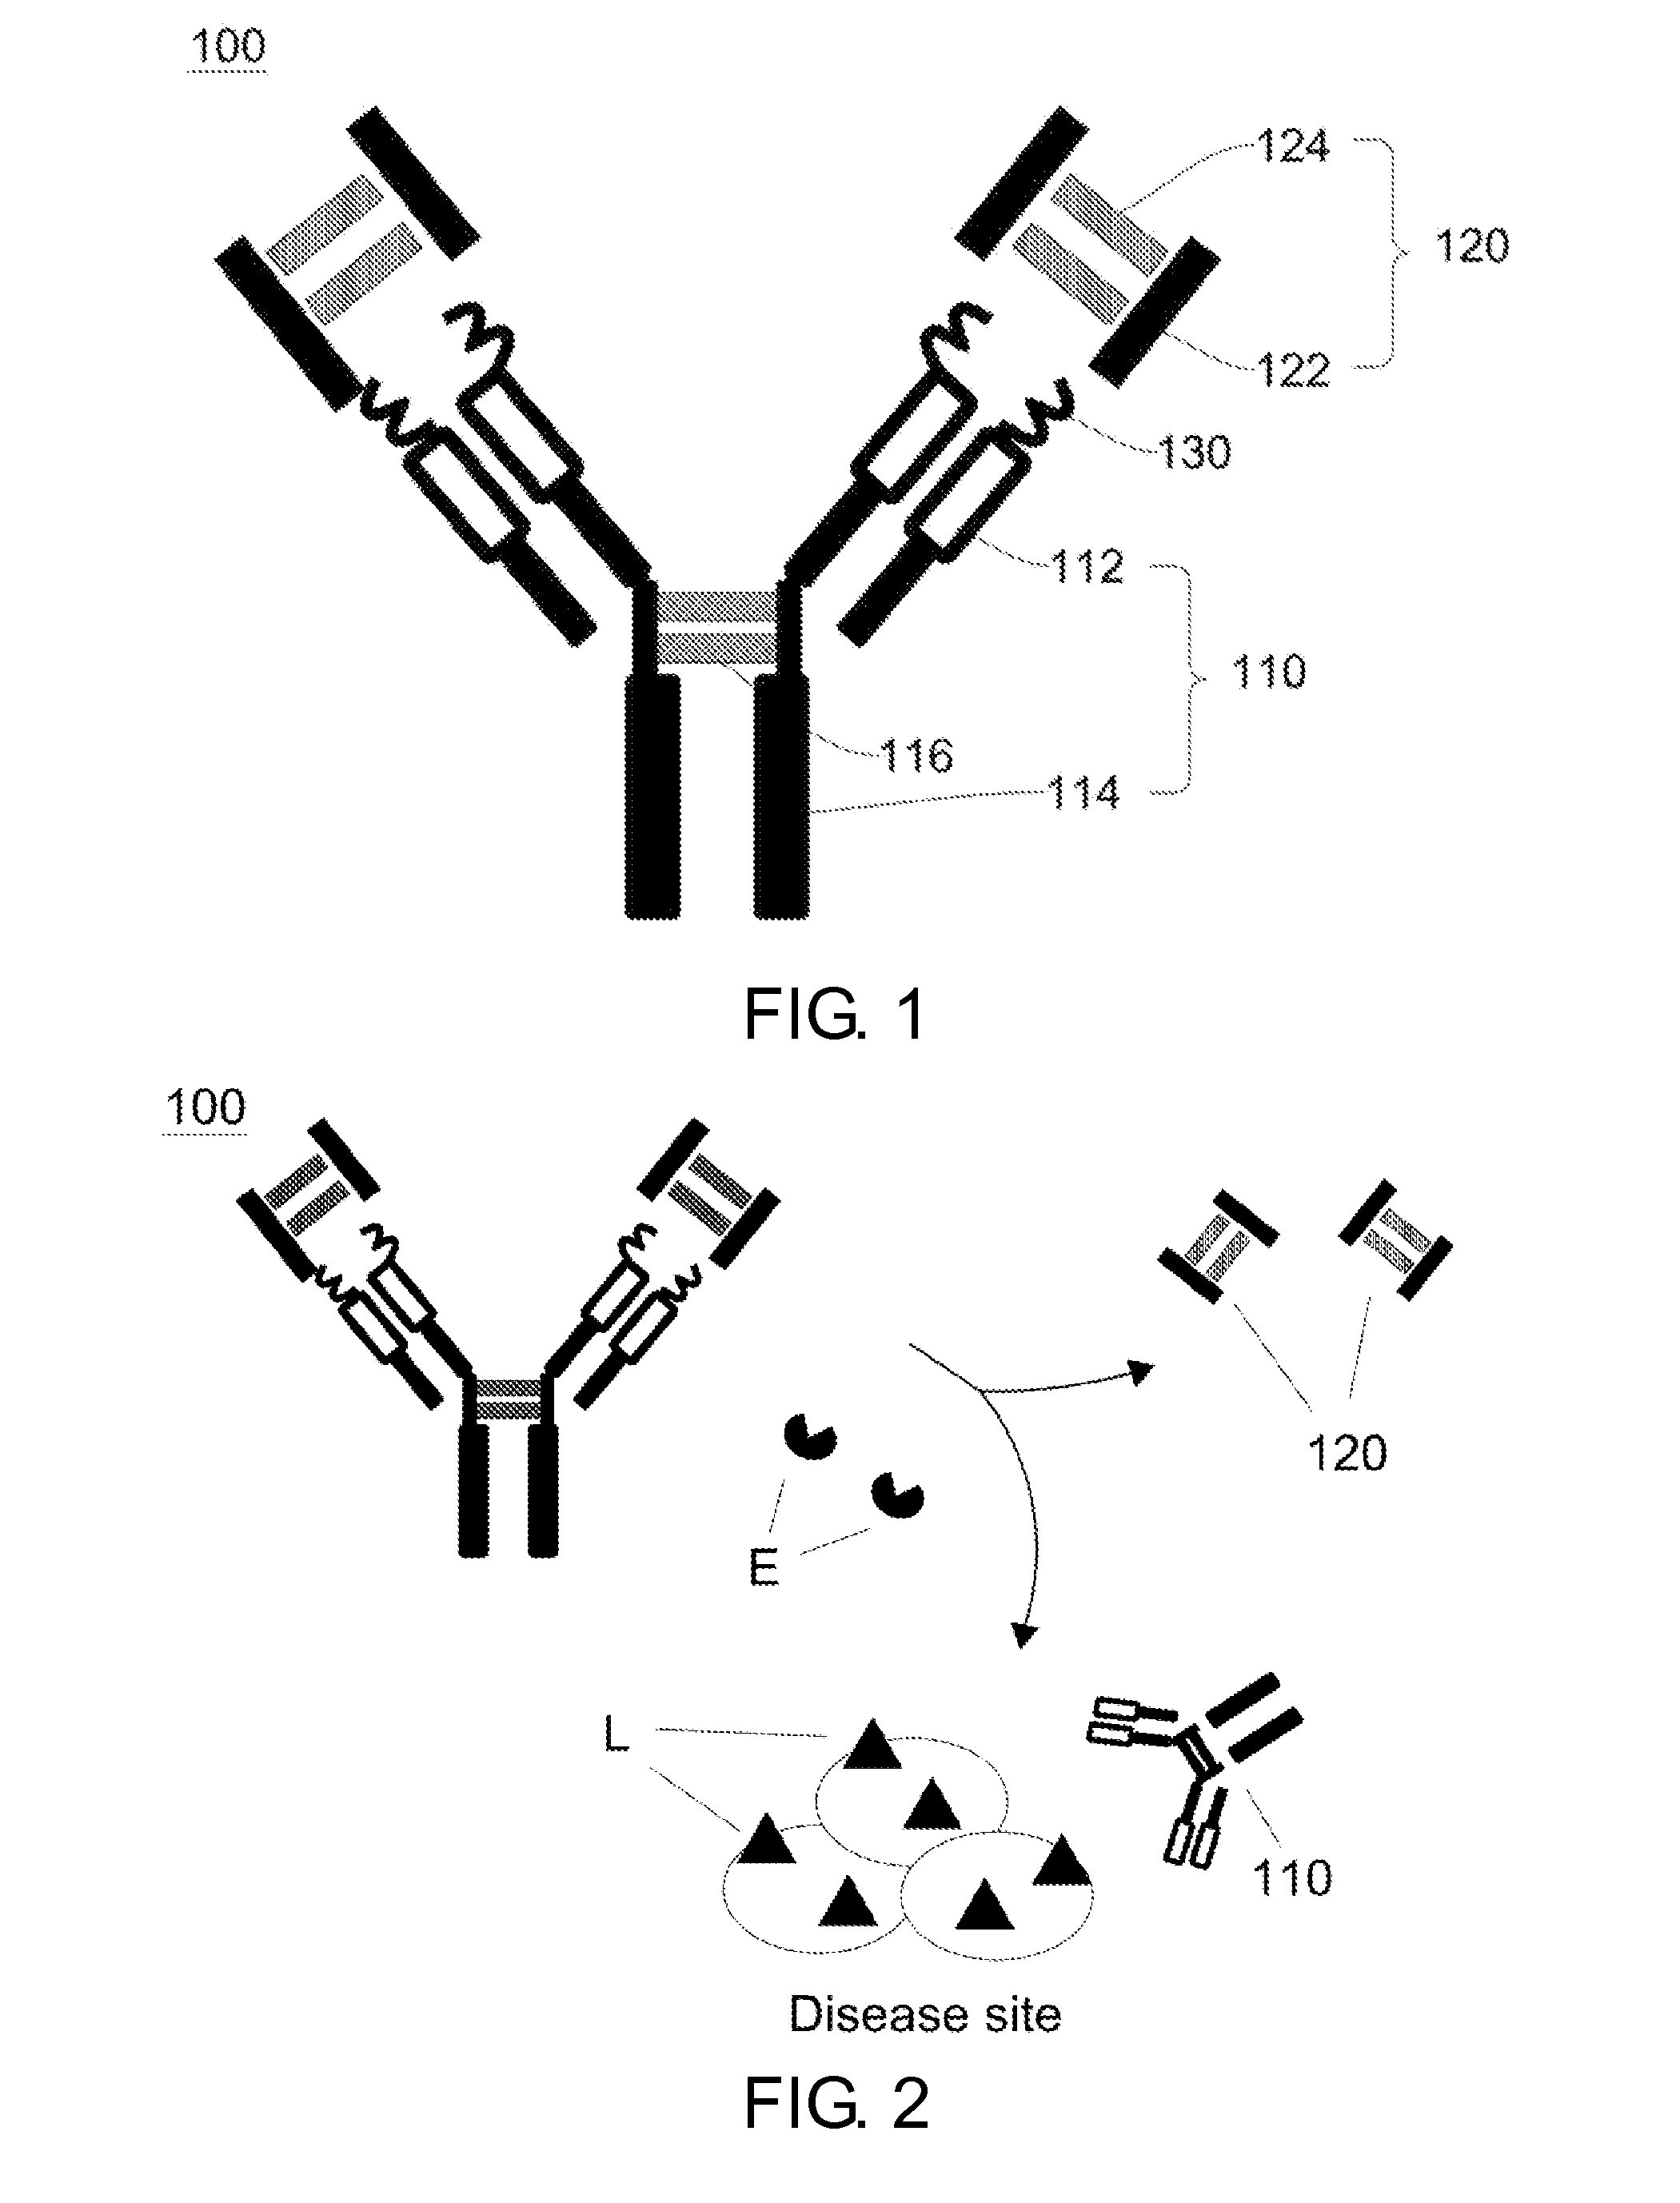 Antibody locker for the inactivation of protein drug